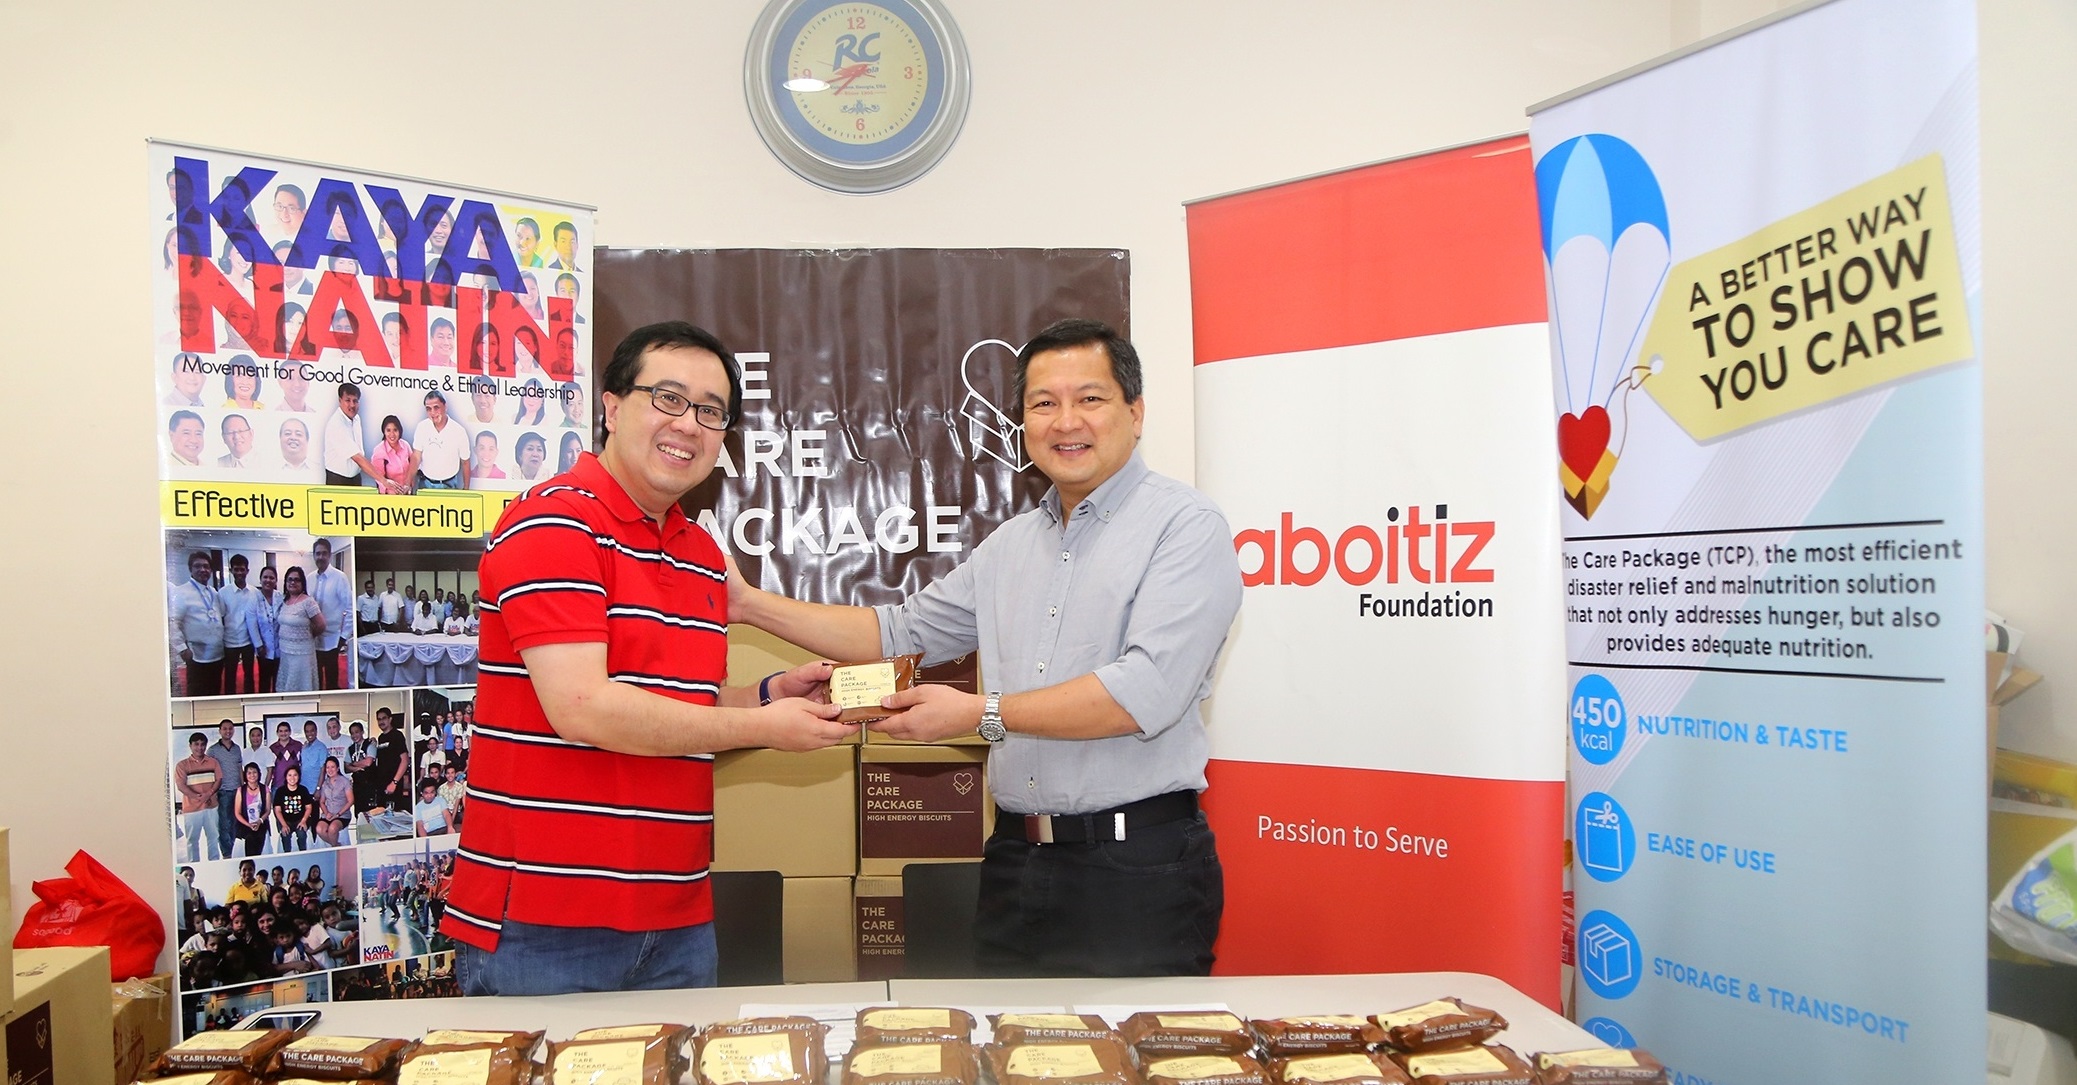 Aboitiz Equity Ventures First Vice President for Government Relations DJ Sta. Ana led the turnover of The Care Packages to Kaya Natin, represented by Lead Convenor and Trustee Harvey Keh, last January 3. (Contributed photo). 